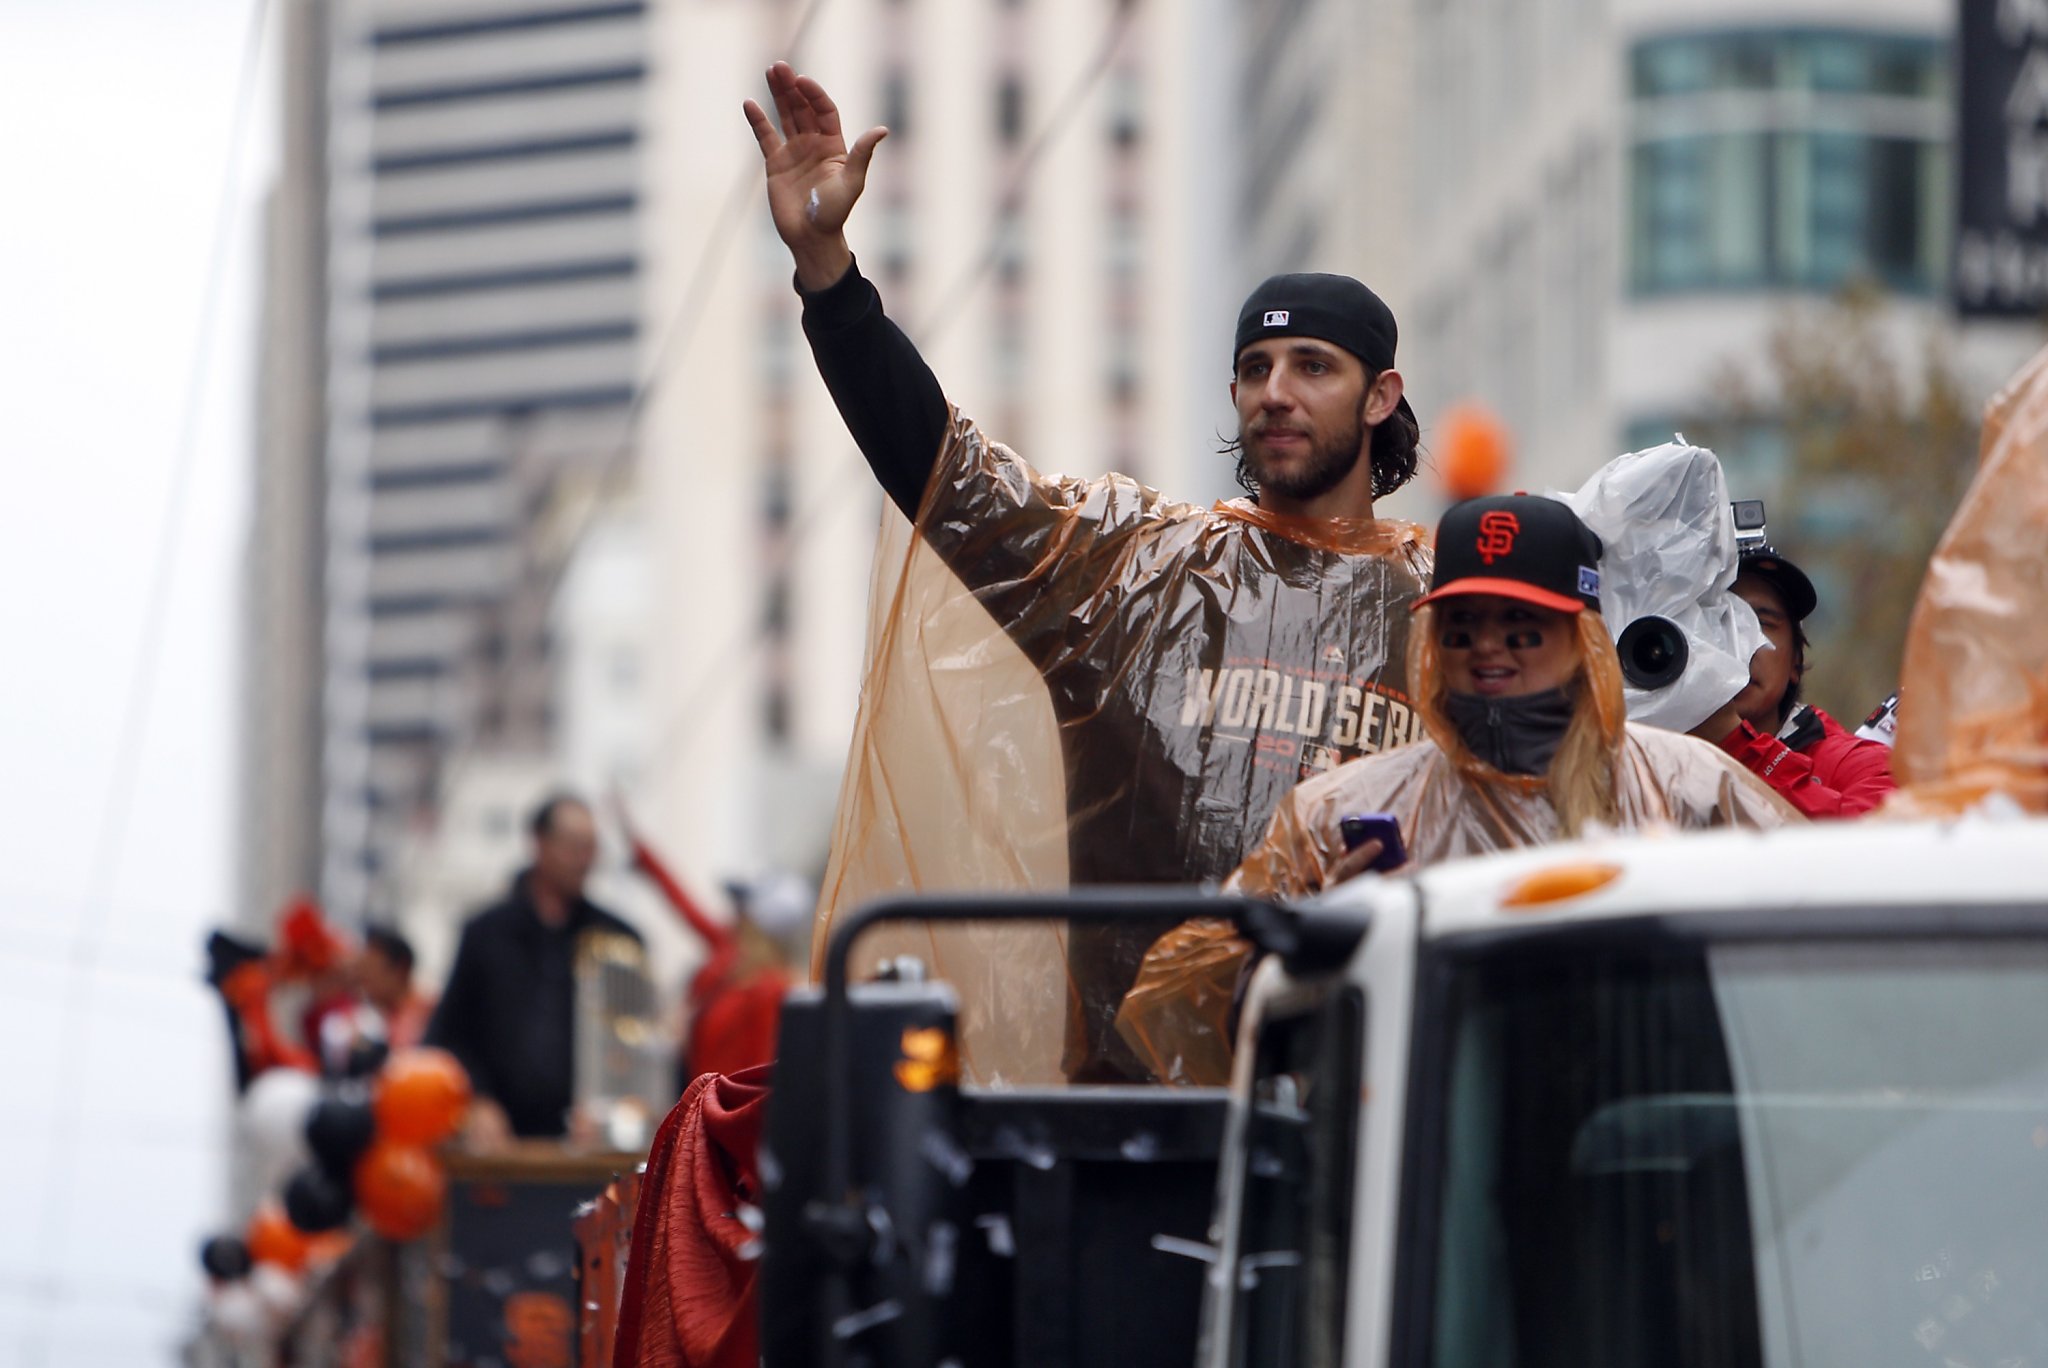 Celebrate the SF Giants' triumph with Jeremy Affeldt and Madison